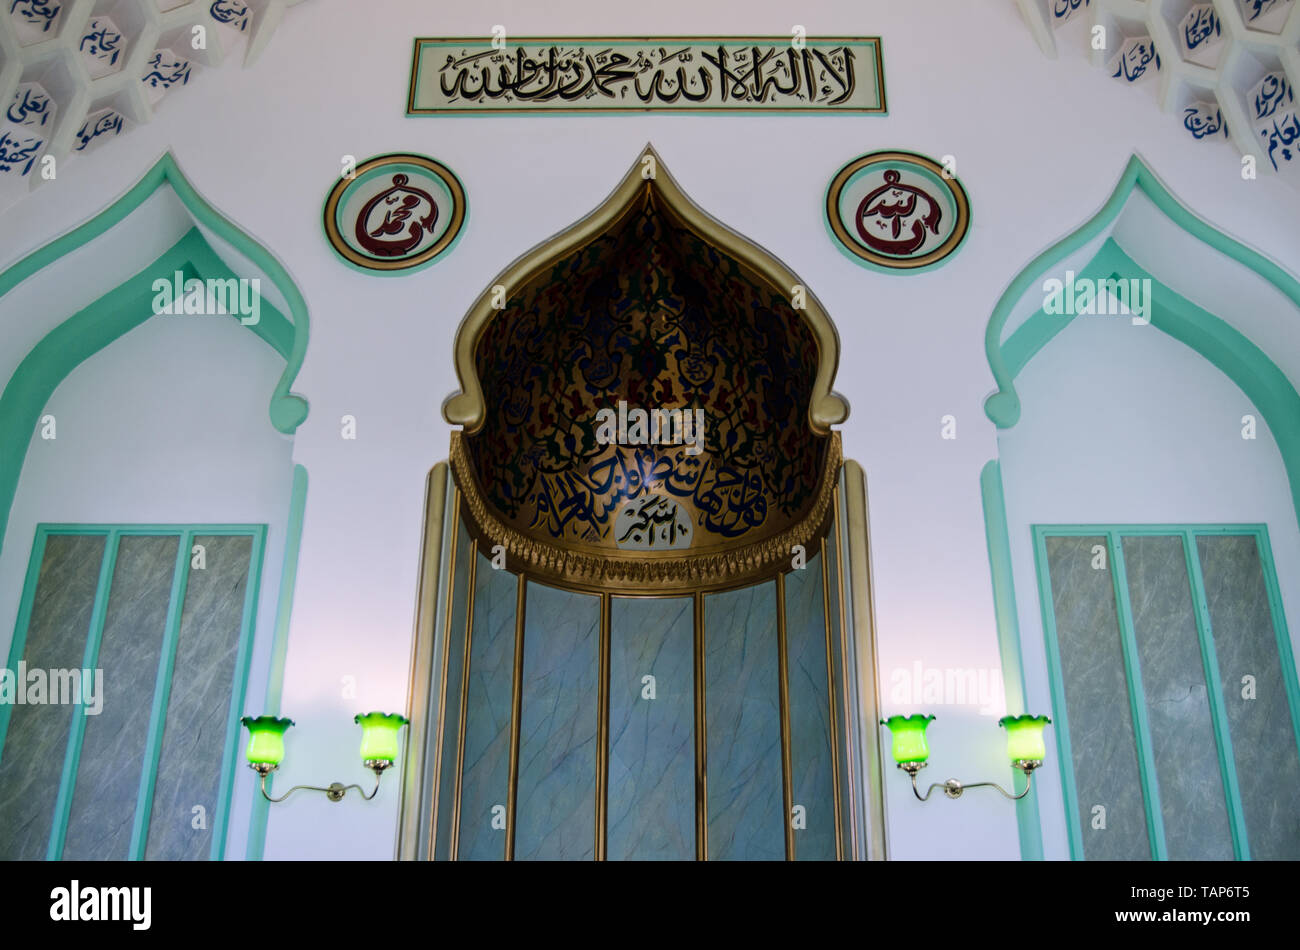 WOKING, UK - FEBRUARY 7, 2016: Interior of the Shah Jahan Mosque in Woking, Surrey.  The first purpose built mosque in the UK. Stock Photo